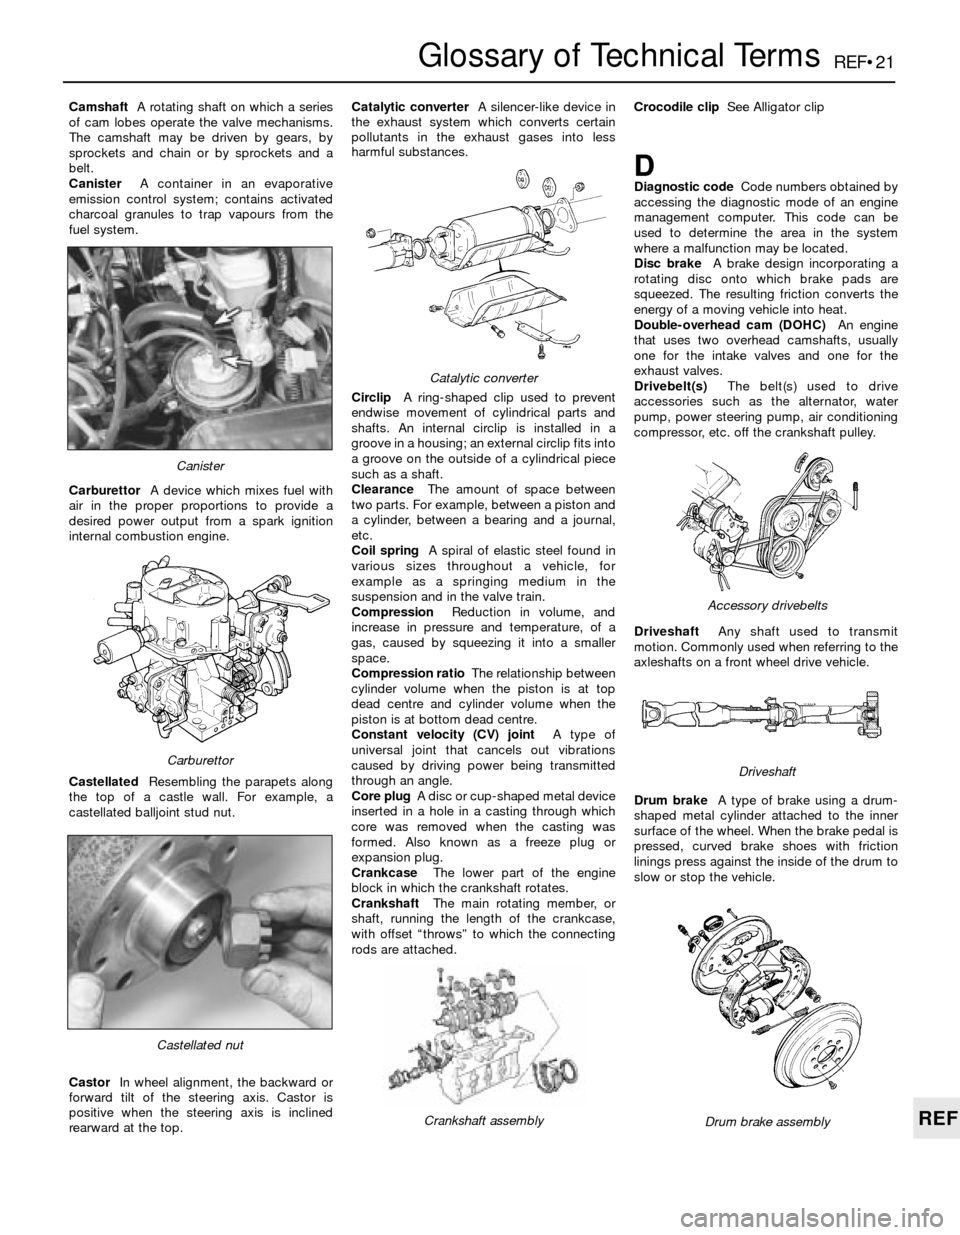 BMW 5 SERIES 1989 E34 User Guide REF•21
REF
Glossary of Technical Terms
CamshaftA rotating shaft on which a series
of cam lobes operate the valve mechanisms.
The camshaft may be driven by gears, by
sprockets and chain or by sprocke